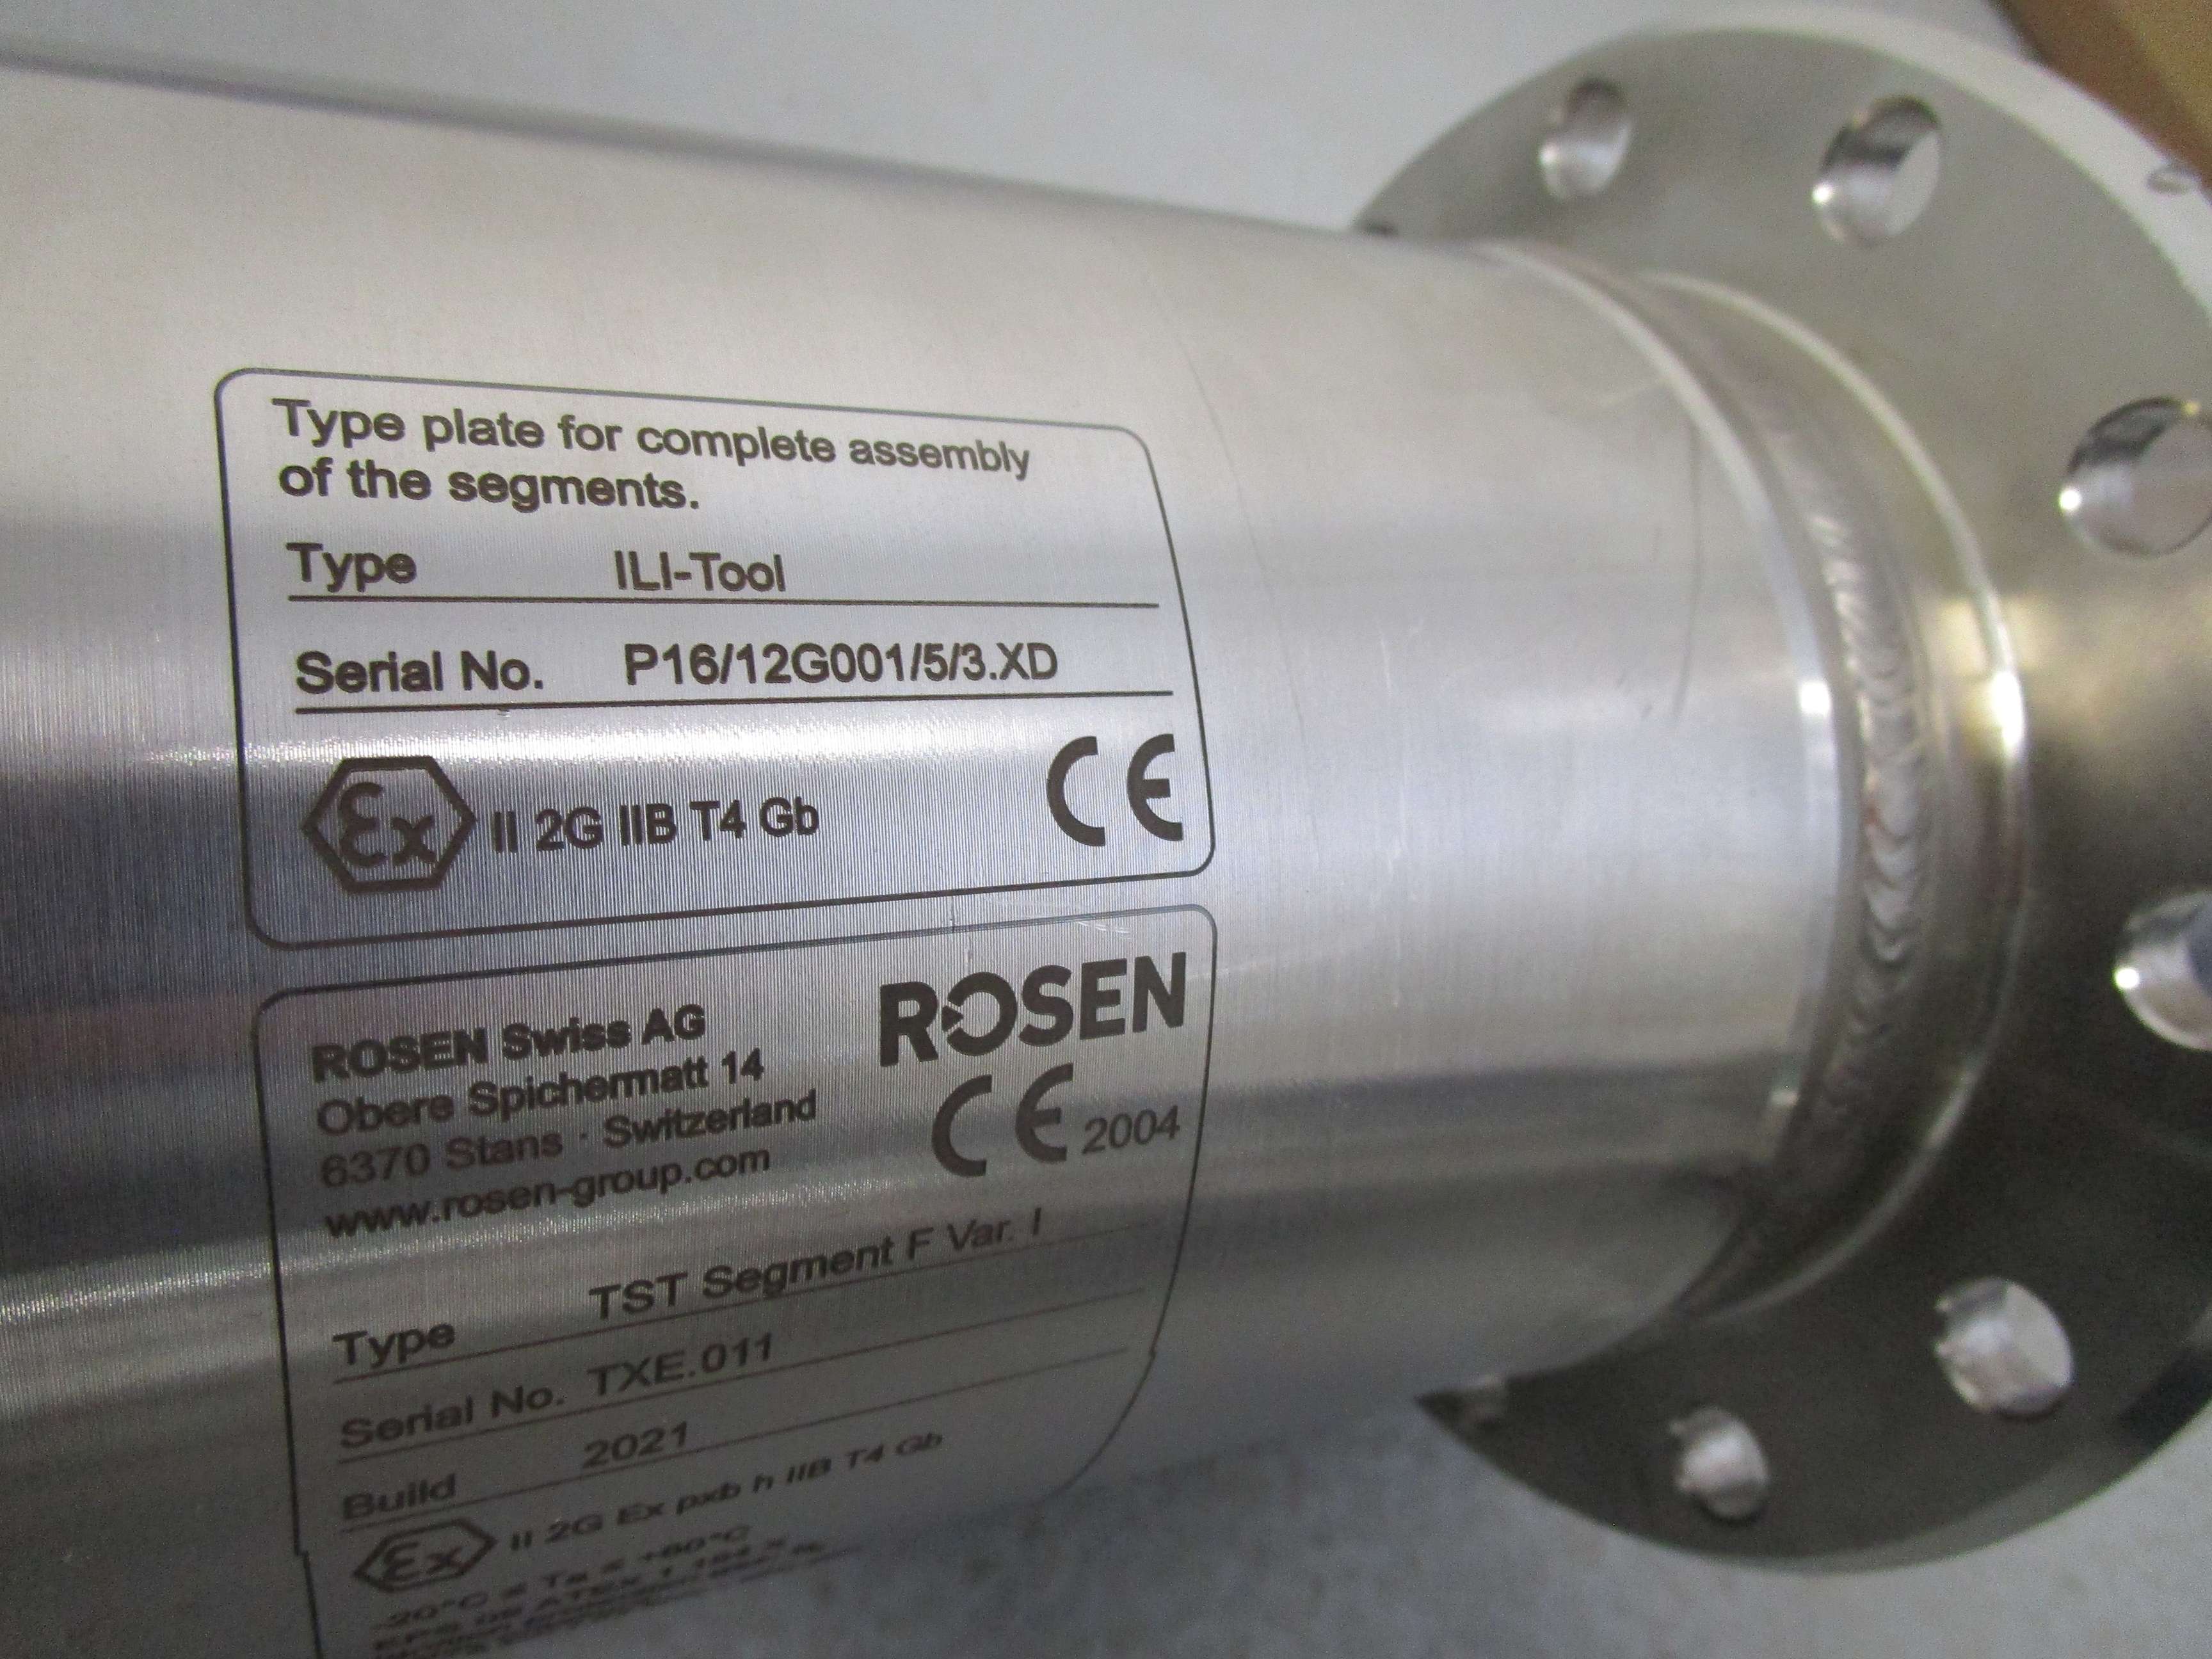 Type plate of an ATEX compliant ROSEN tool.